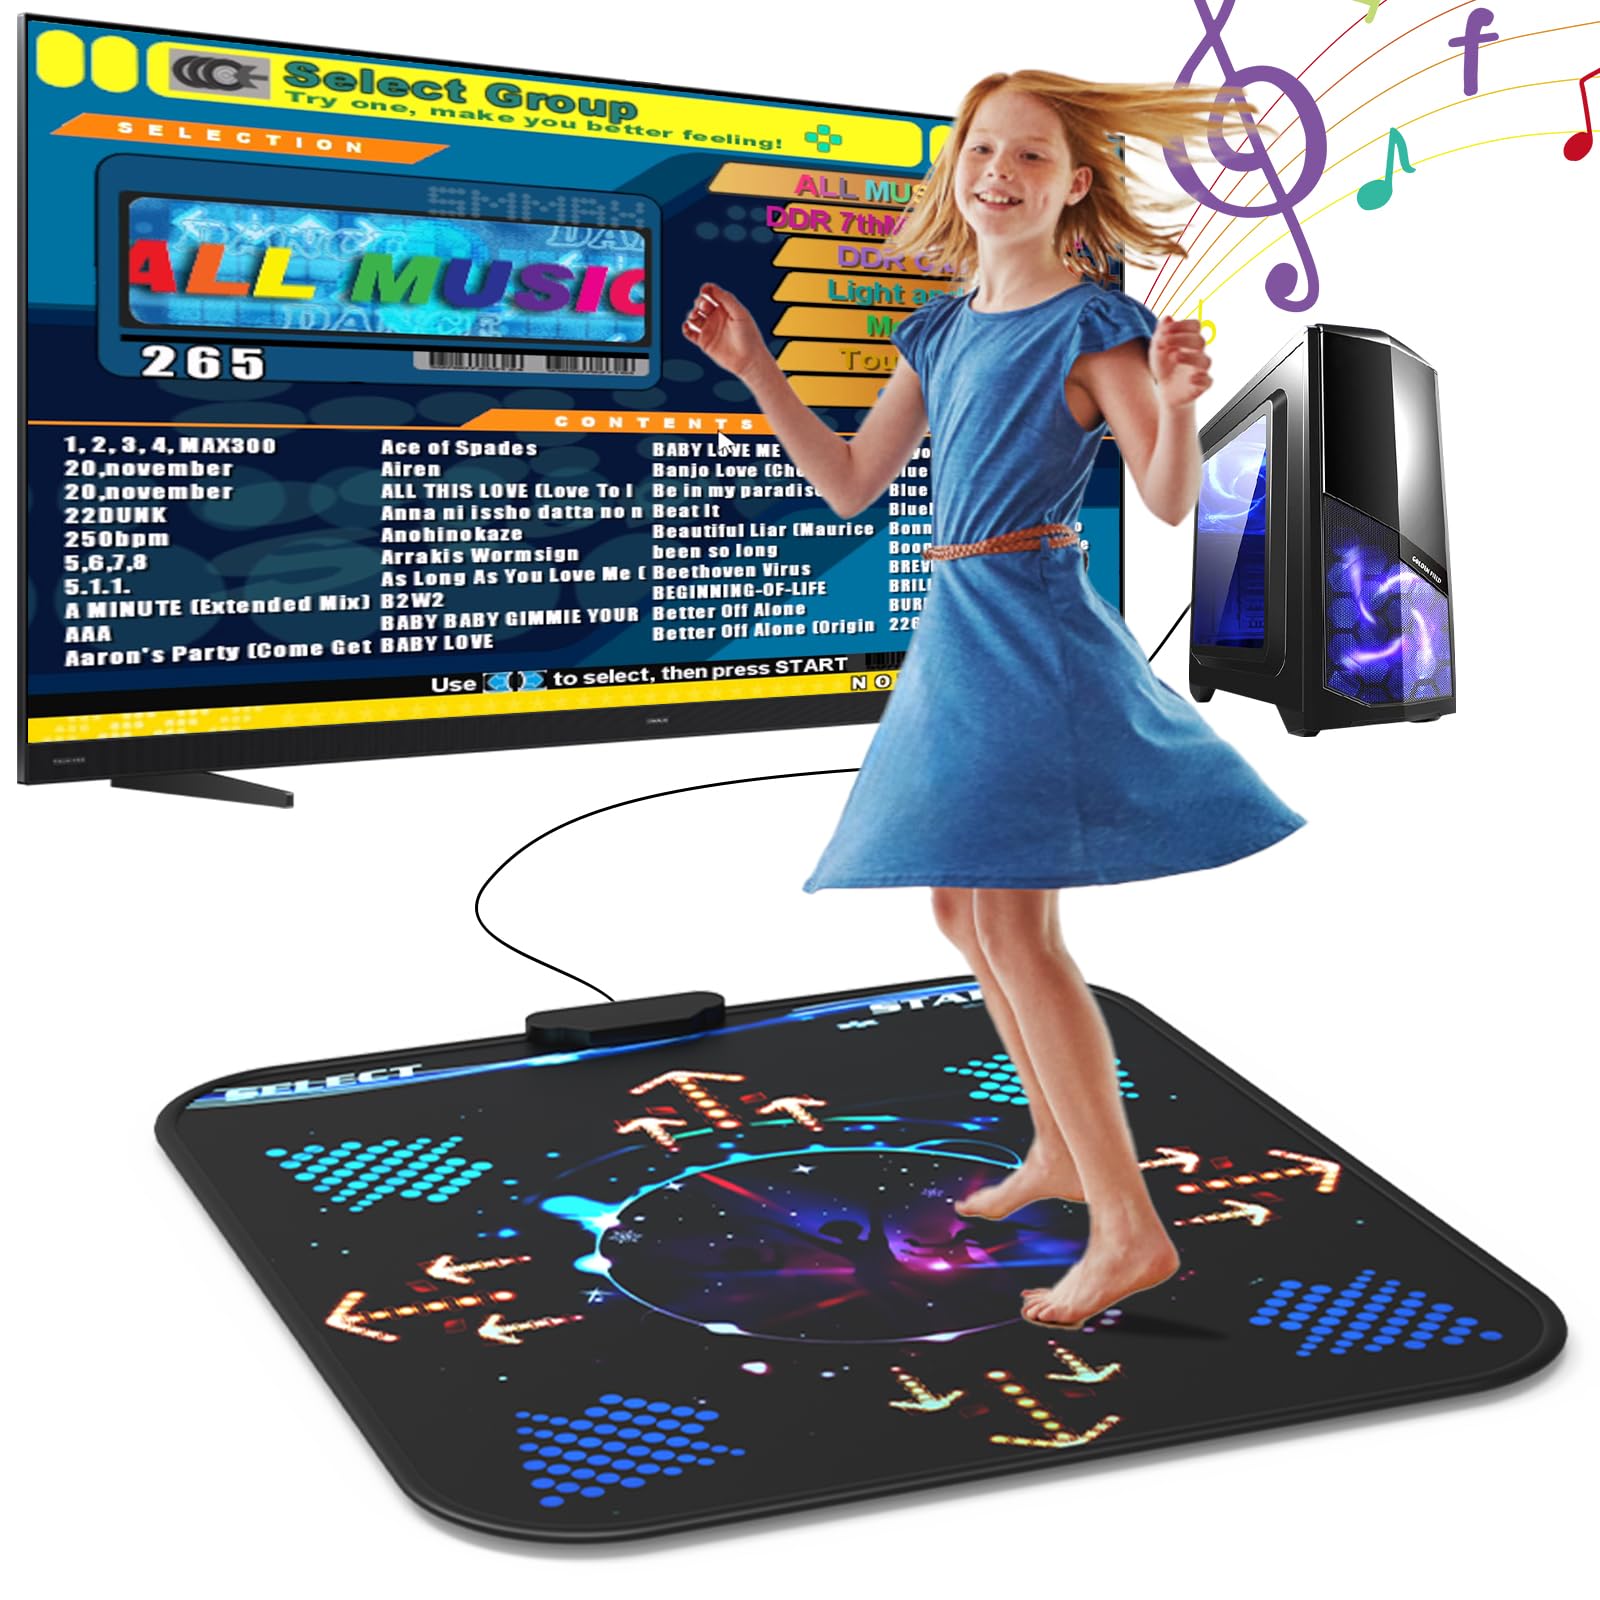 BEBAPOW USB Dance Mat for PC/Computer, Upgraded Dance Pad for Exercise & Fitness with Dancing Game Software, Compatiable with Win7/ Win10/ Win11, 7 Difficulty Levels for Kids/Adults